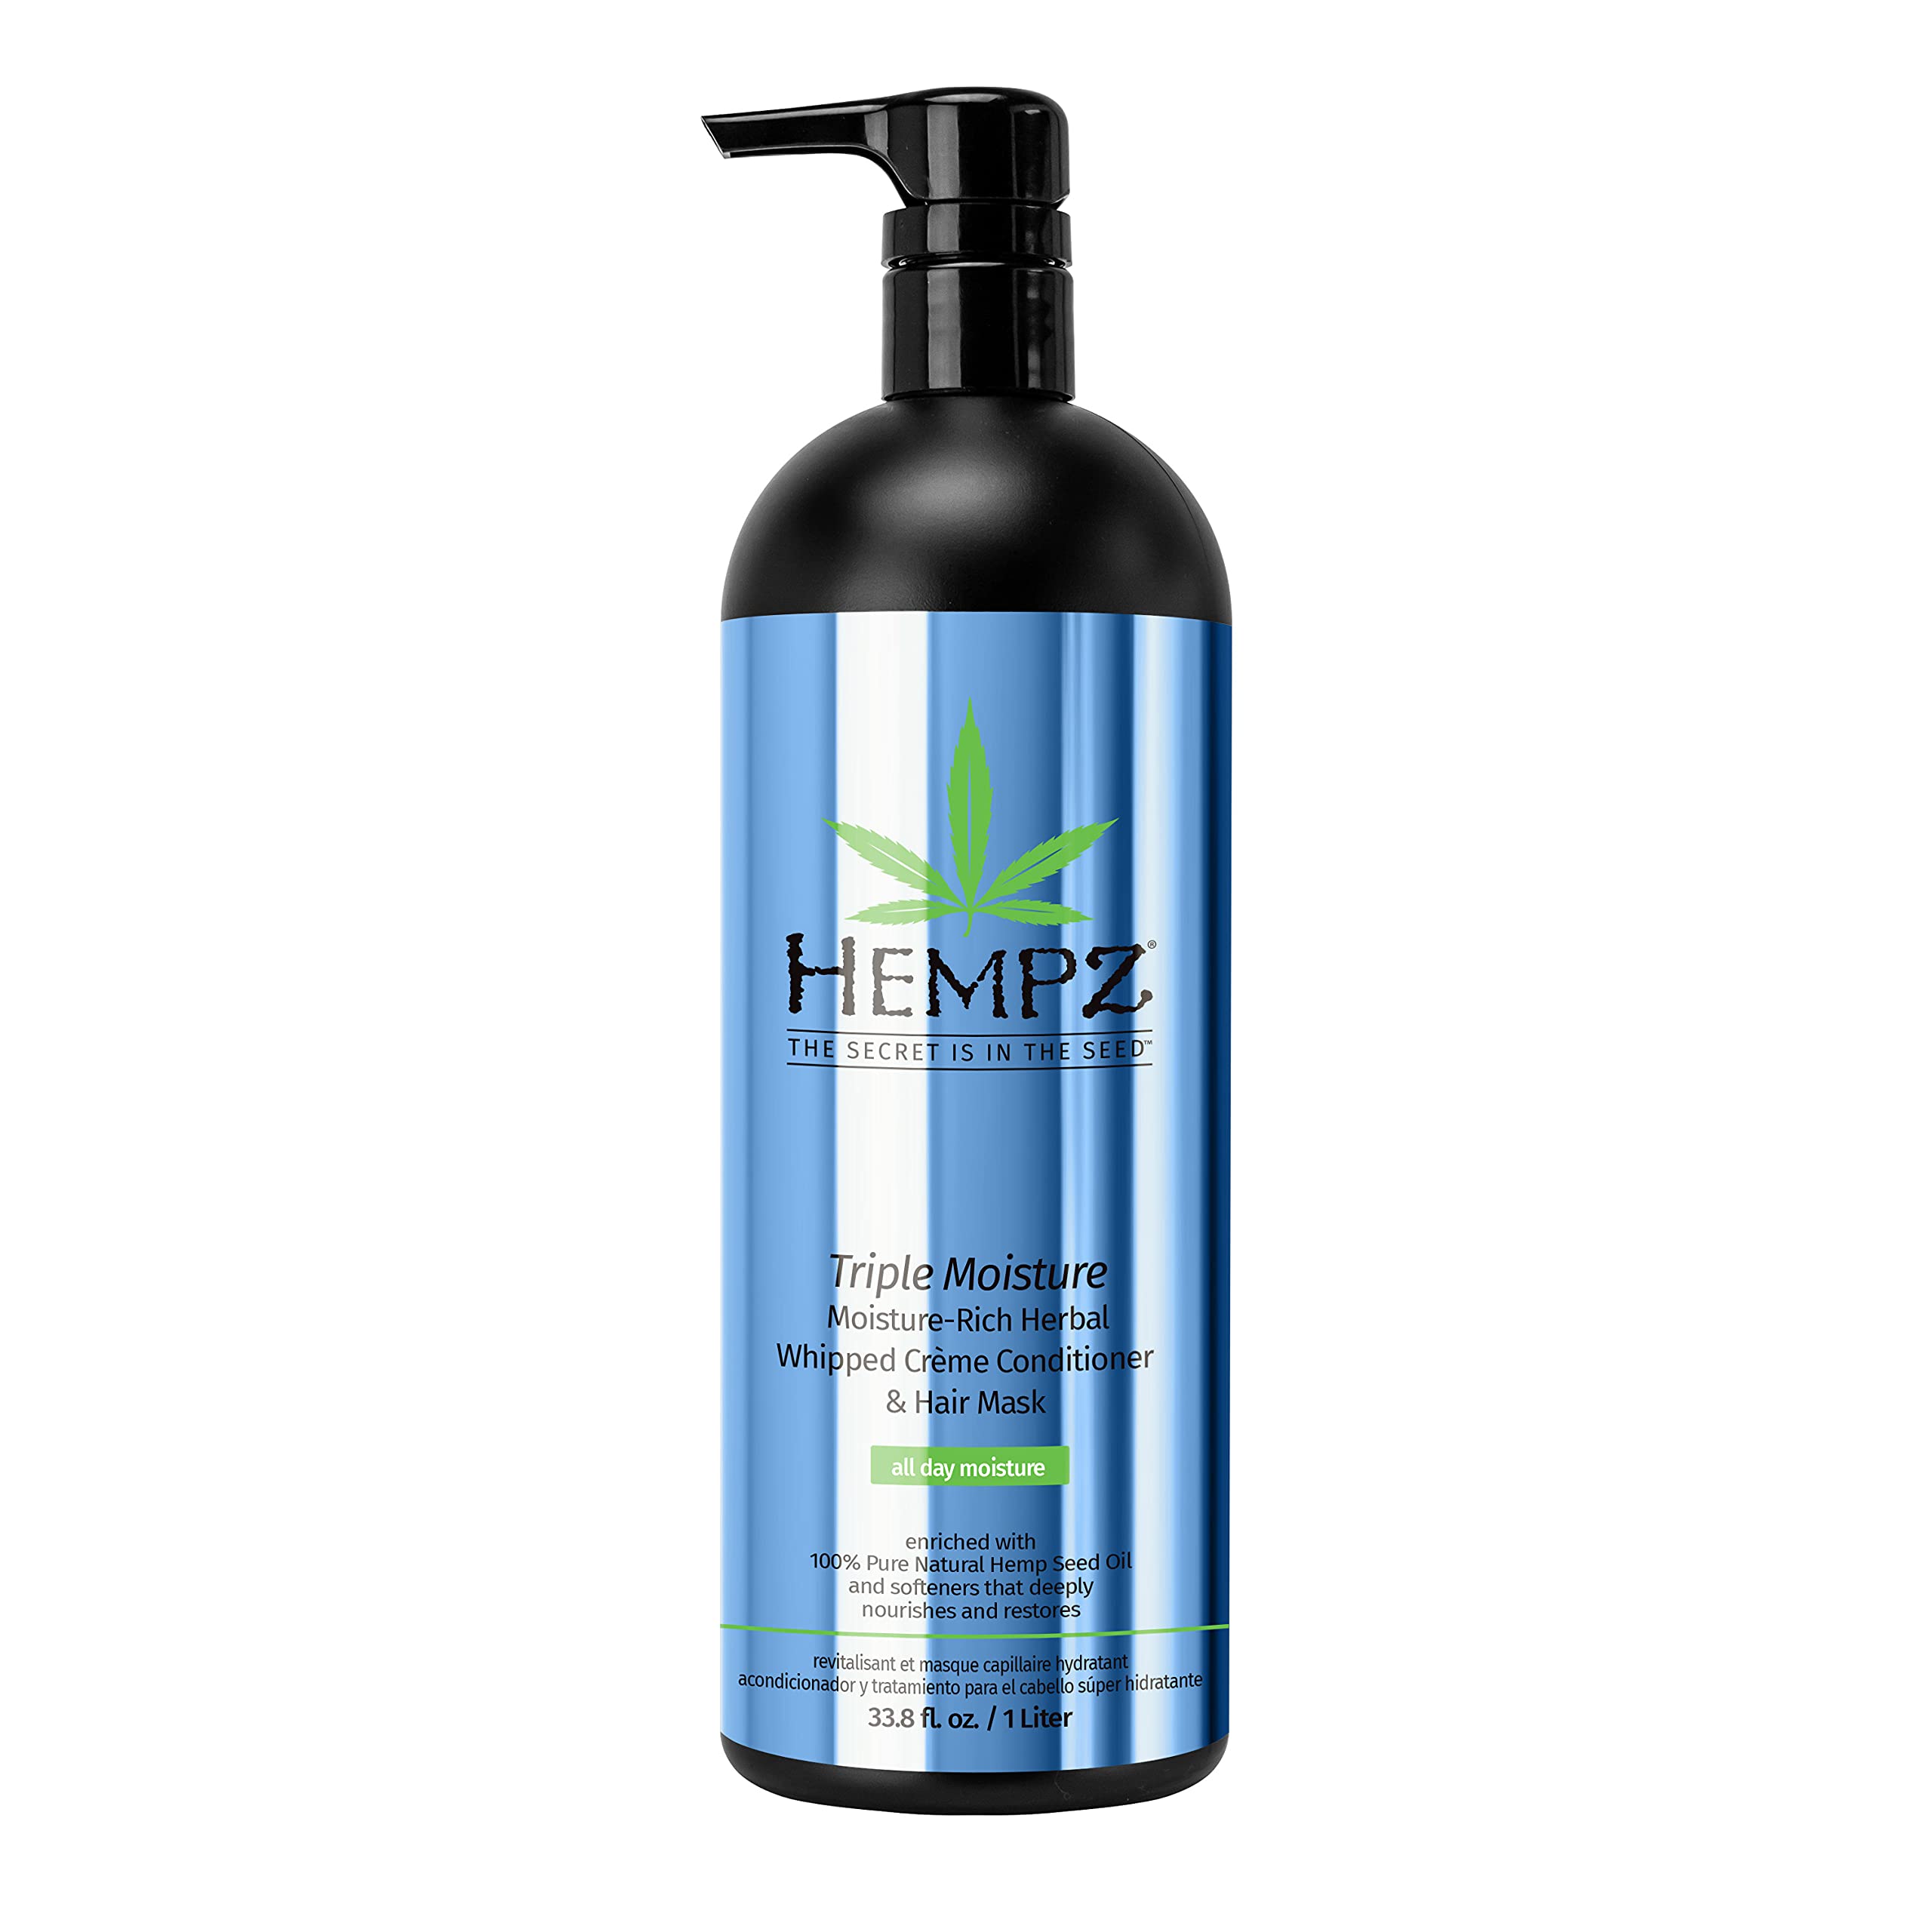 Hempz Triple Moisture-Rich Herbal Whipped Creme Conditioner and Hair Mask for Women and Men, 33.8 oz. - Premium, Natural Moisturizing Conditioners to Repair Dry, Damaged Hair - Scented Hair Care